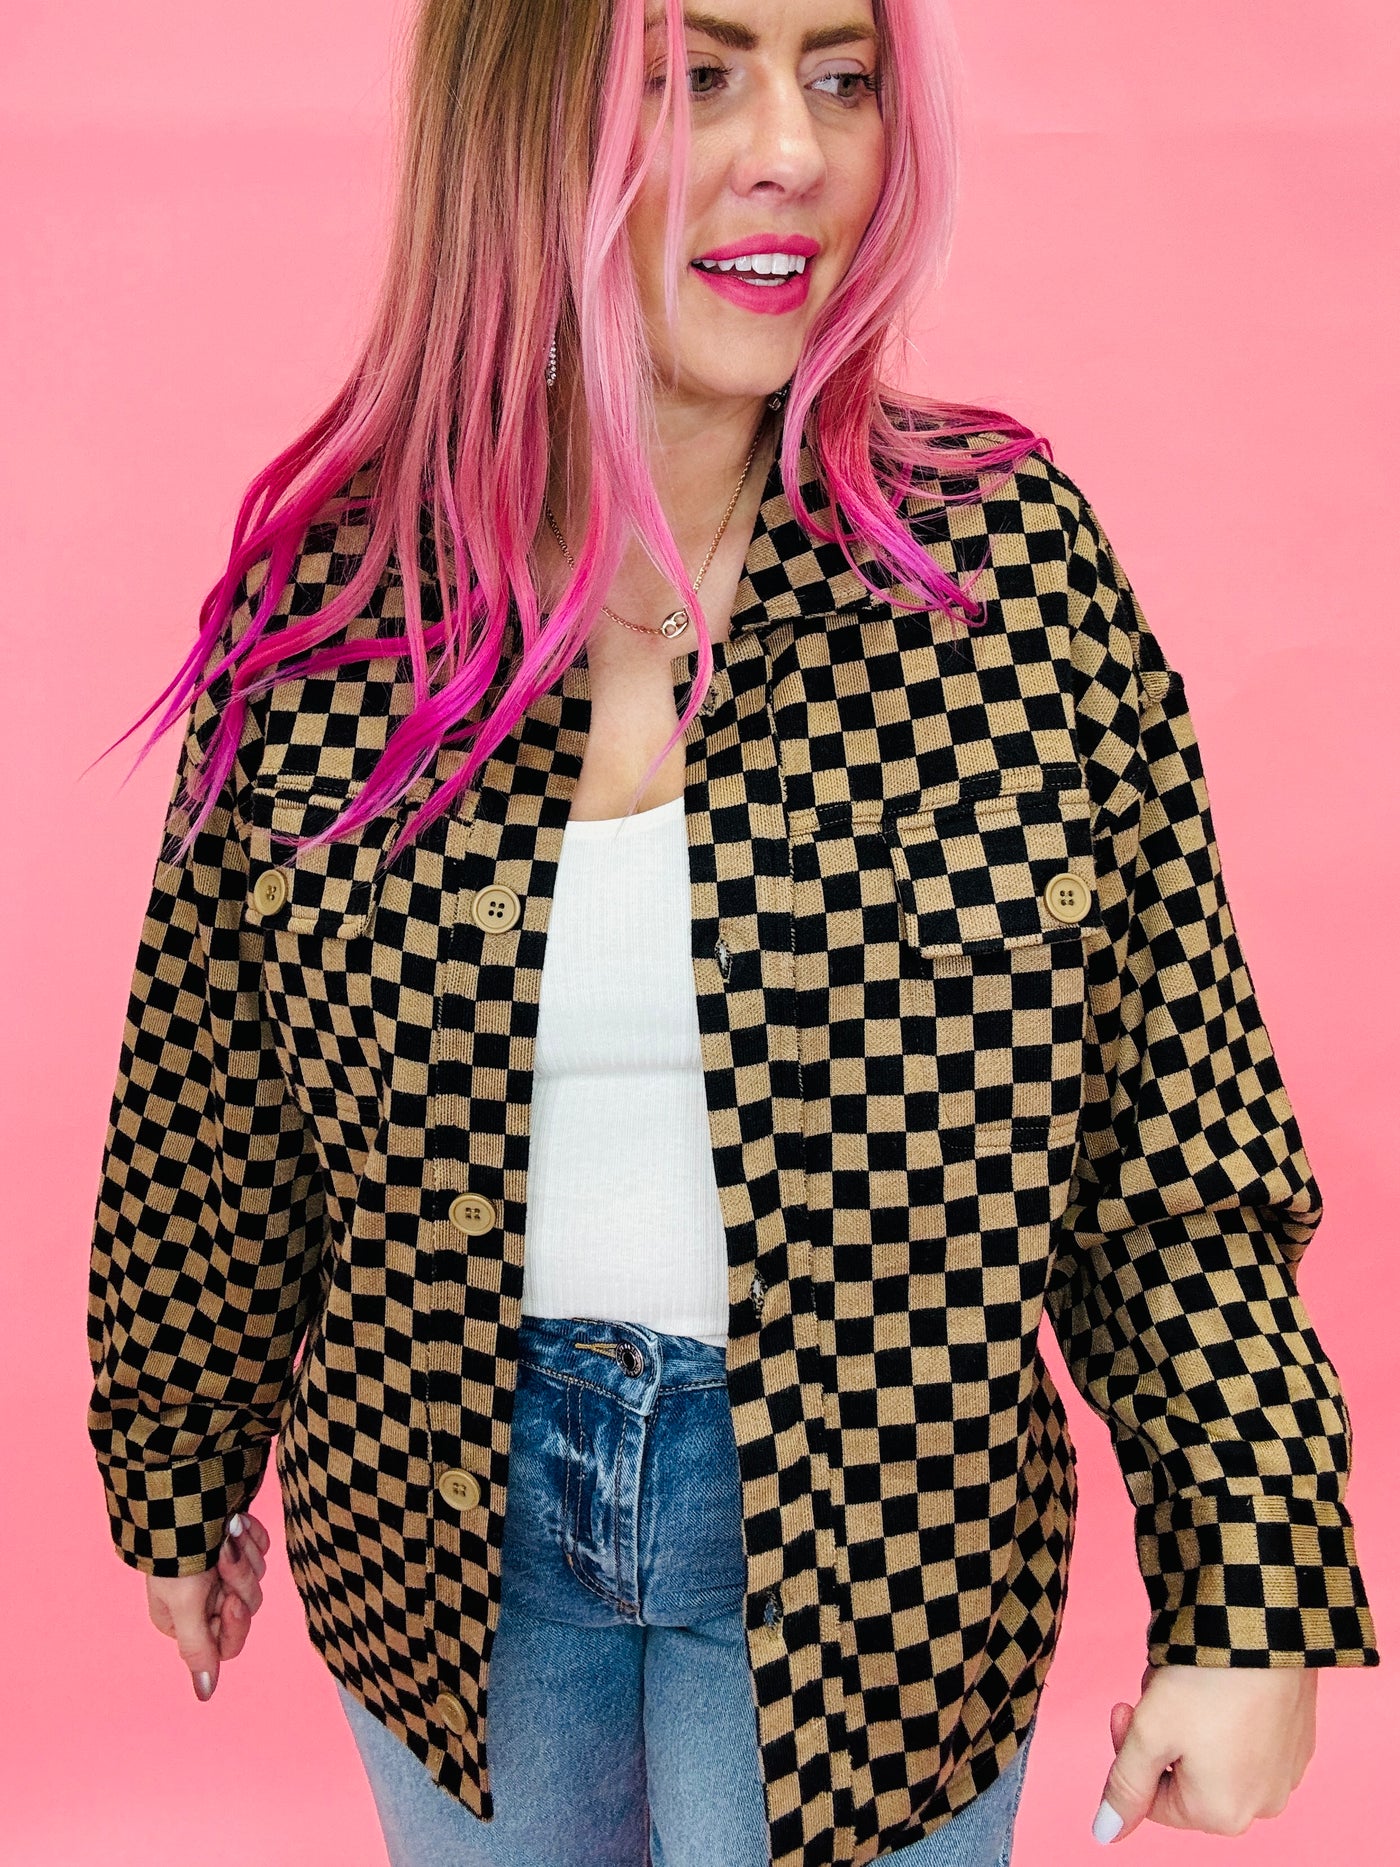 The Danielle Checkered Jacket